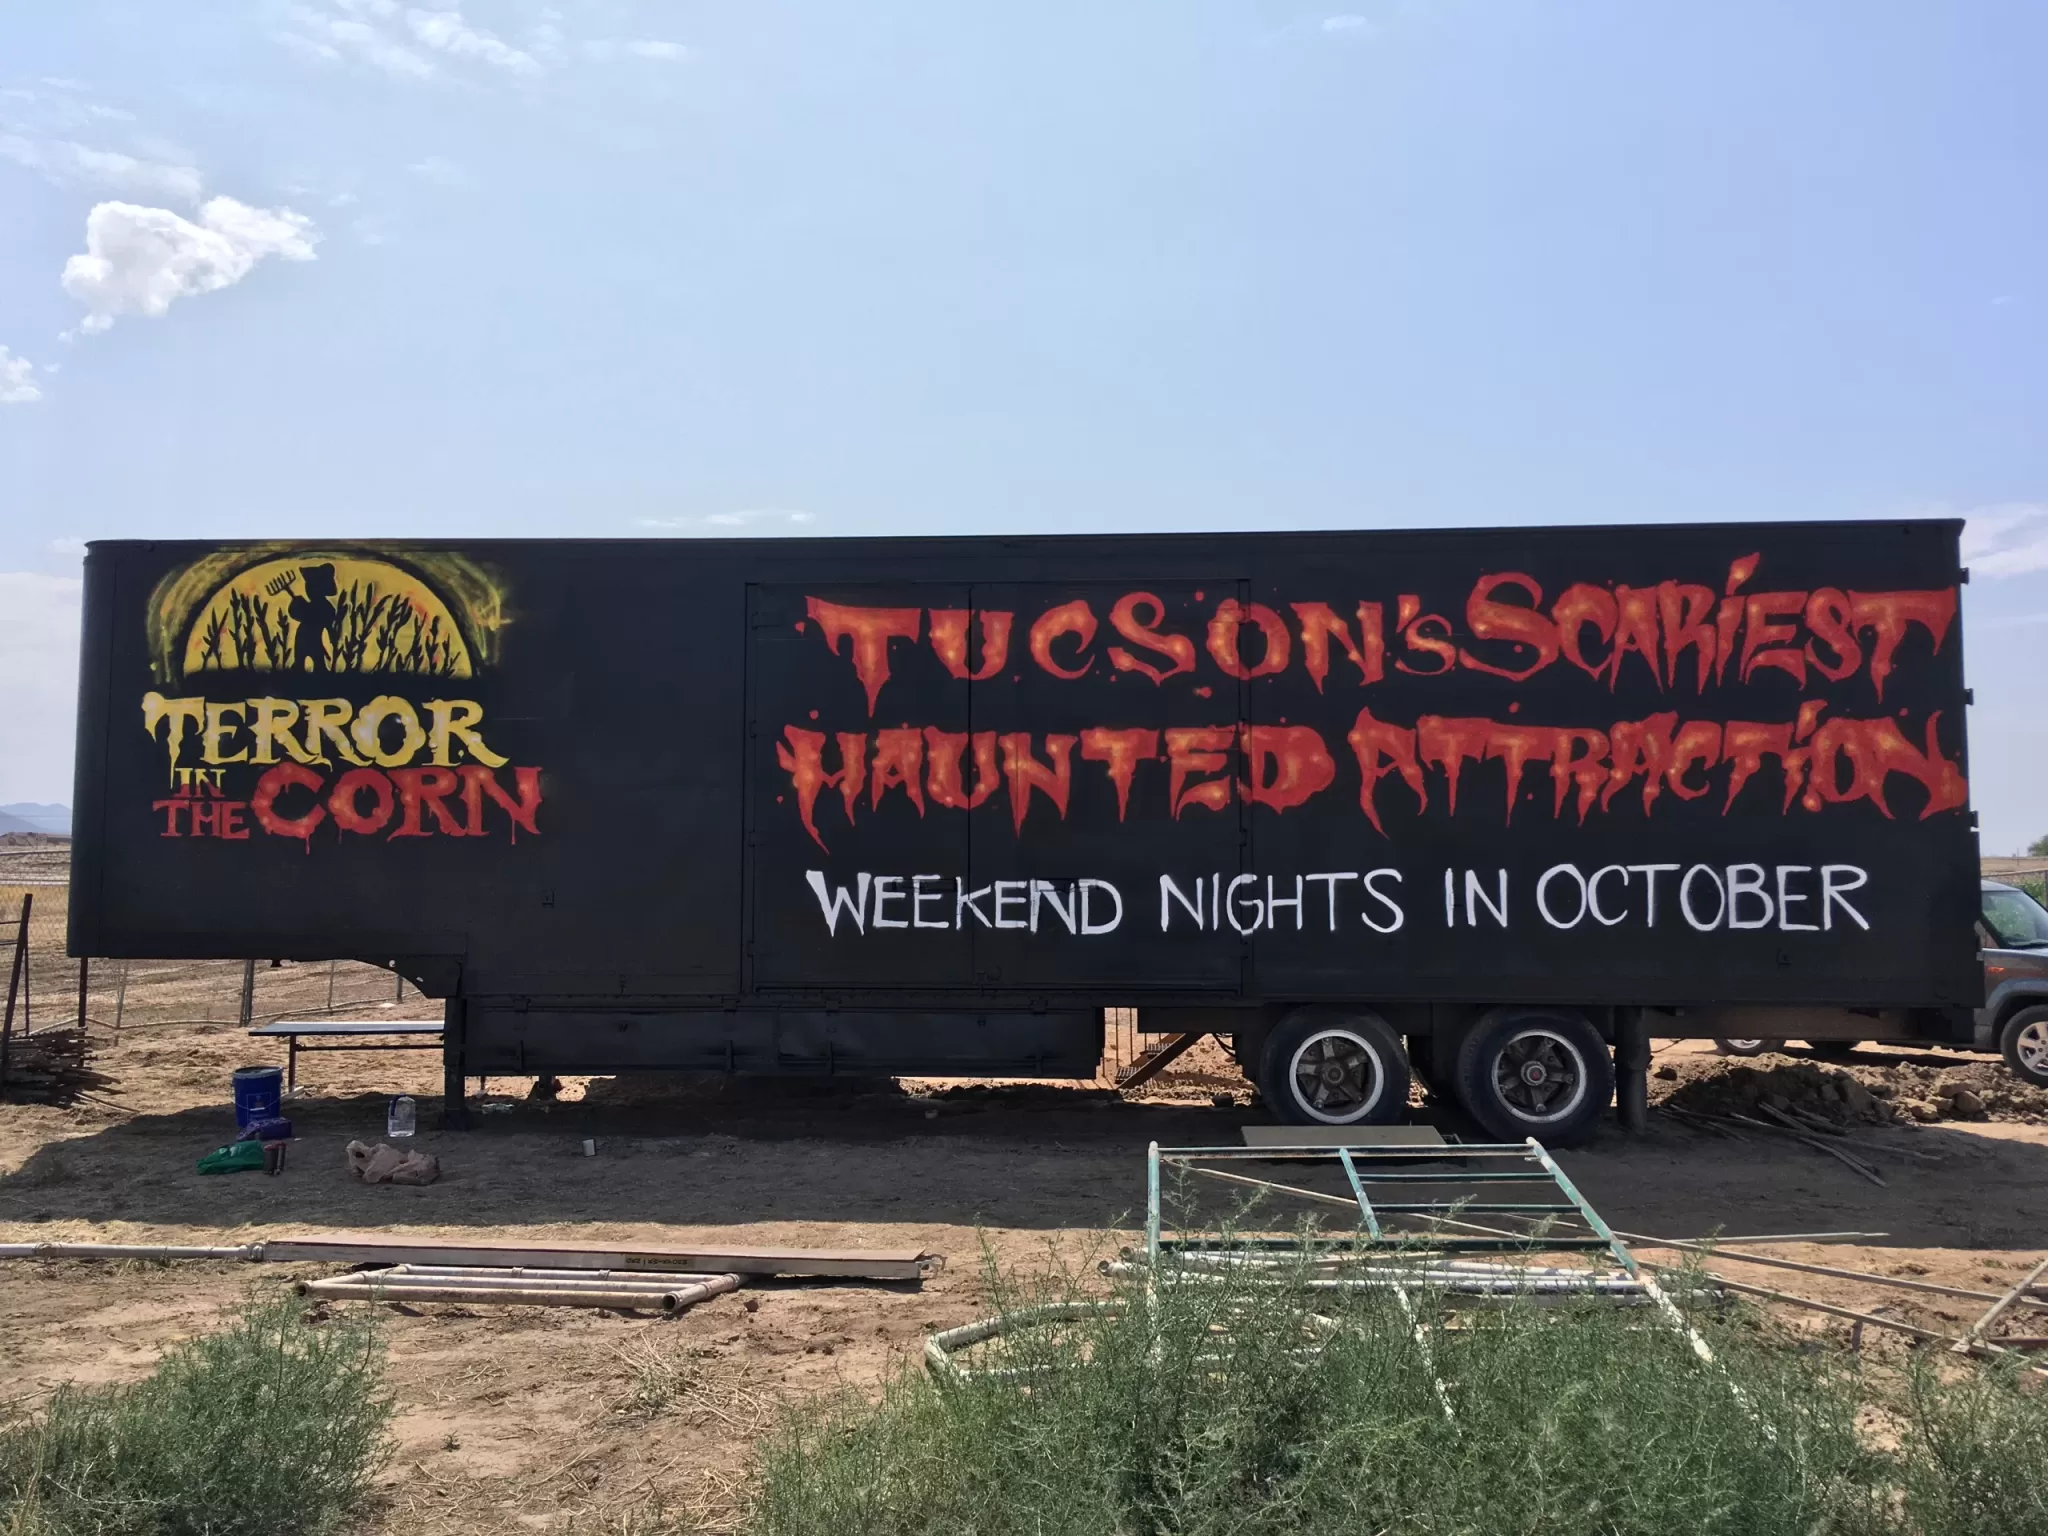 Terror in the corn sign Tucson's Scariest Haunted Attraction